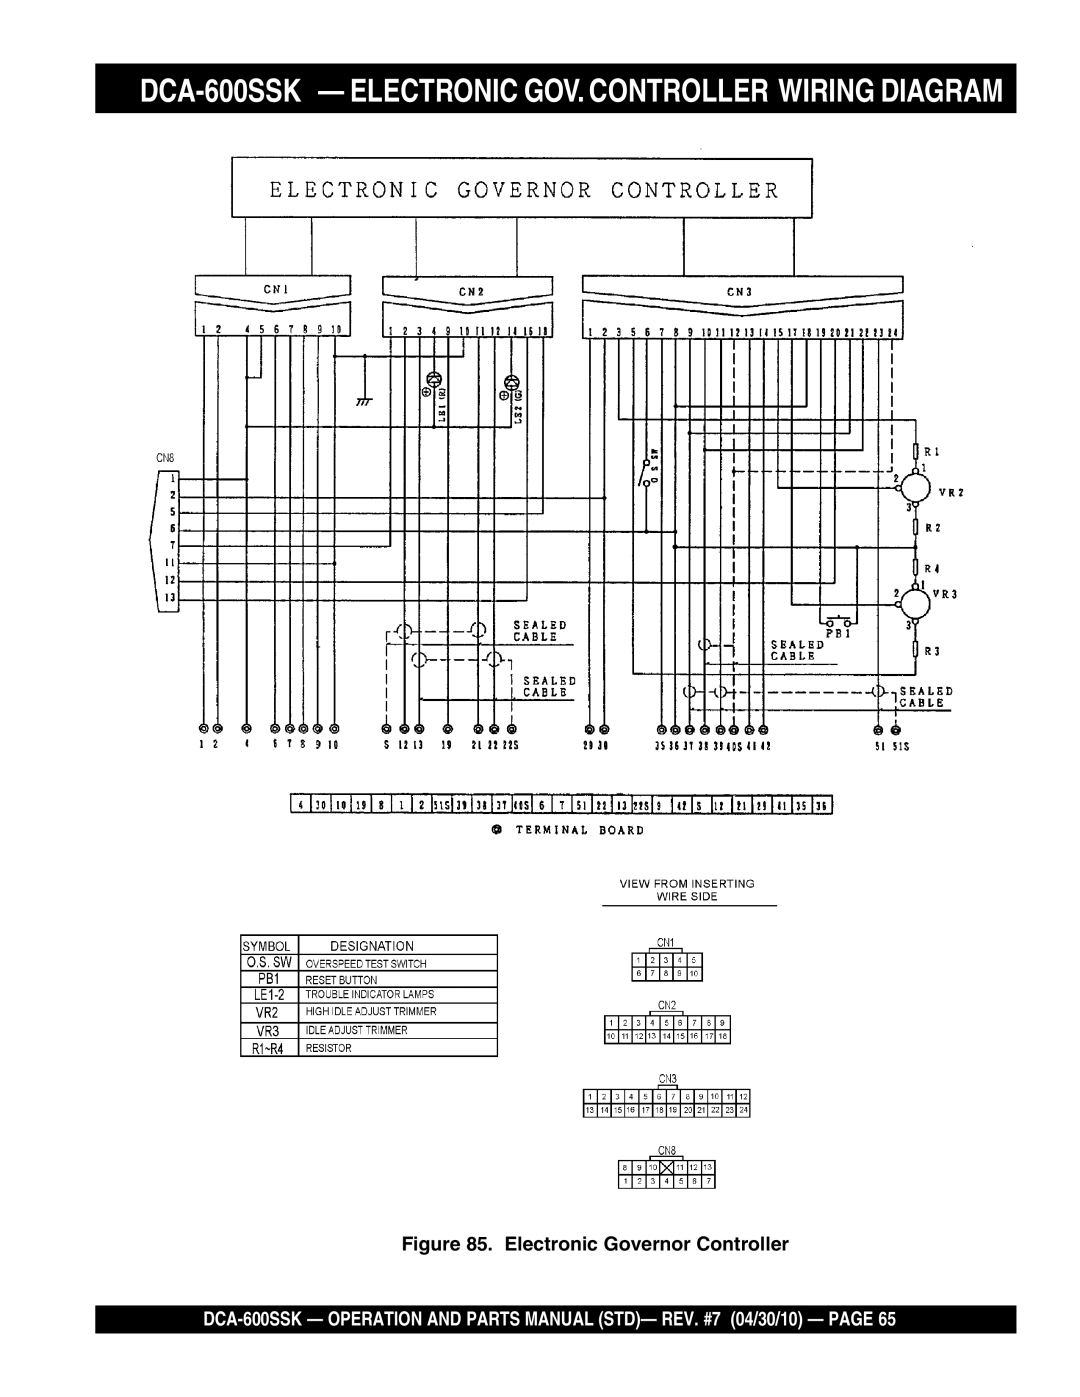 Multiquip operation manual DCA-600SSK - ELECTRONIC GOV. CONTROLLER WIRING DIAGRAM, Electronic Governor Controller 